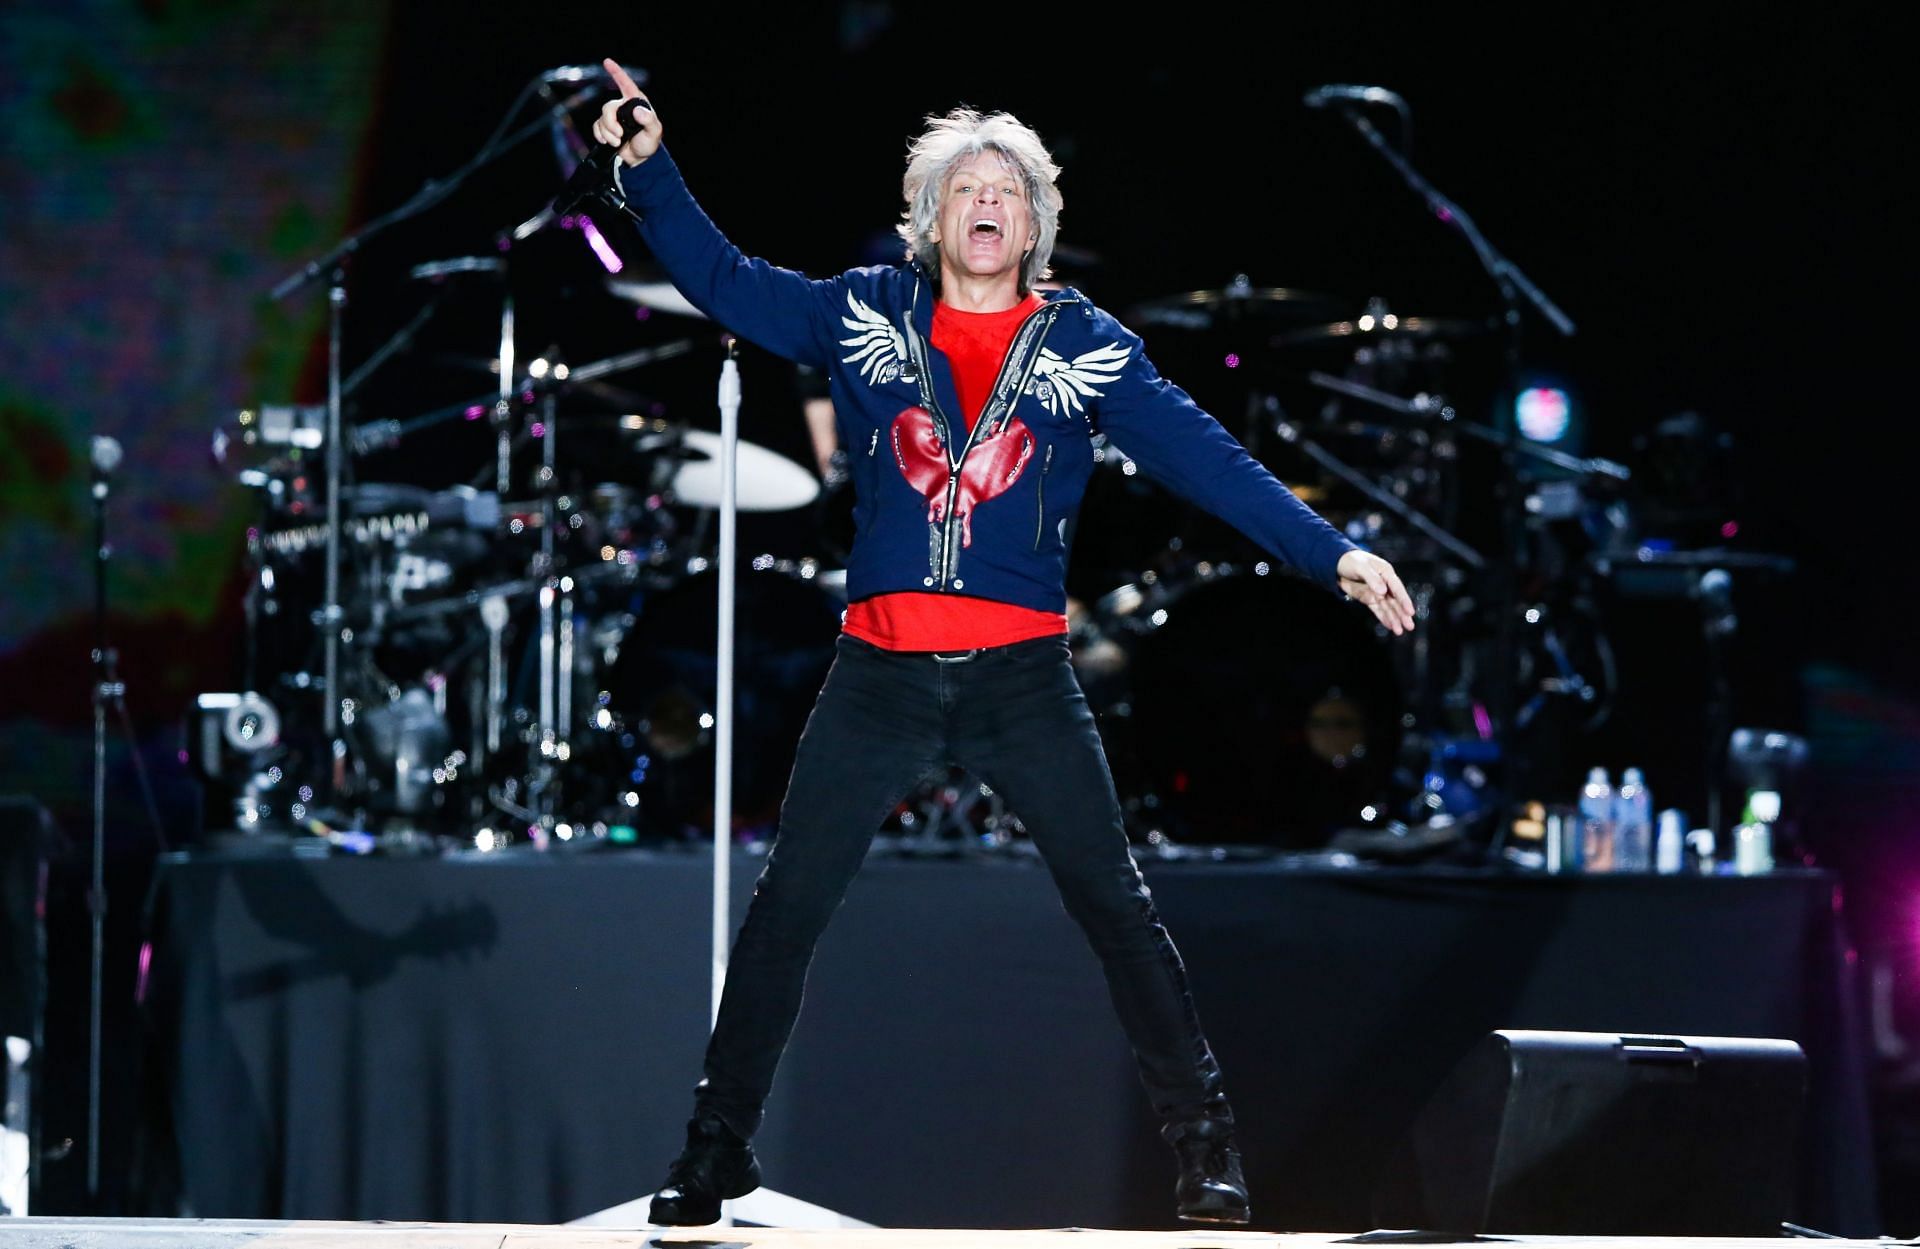 Jon Bon Jovi on stage during Rock in Rio in 2019 (Image via Getty Images)